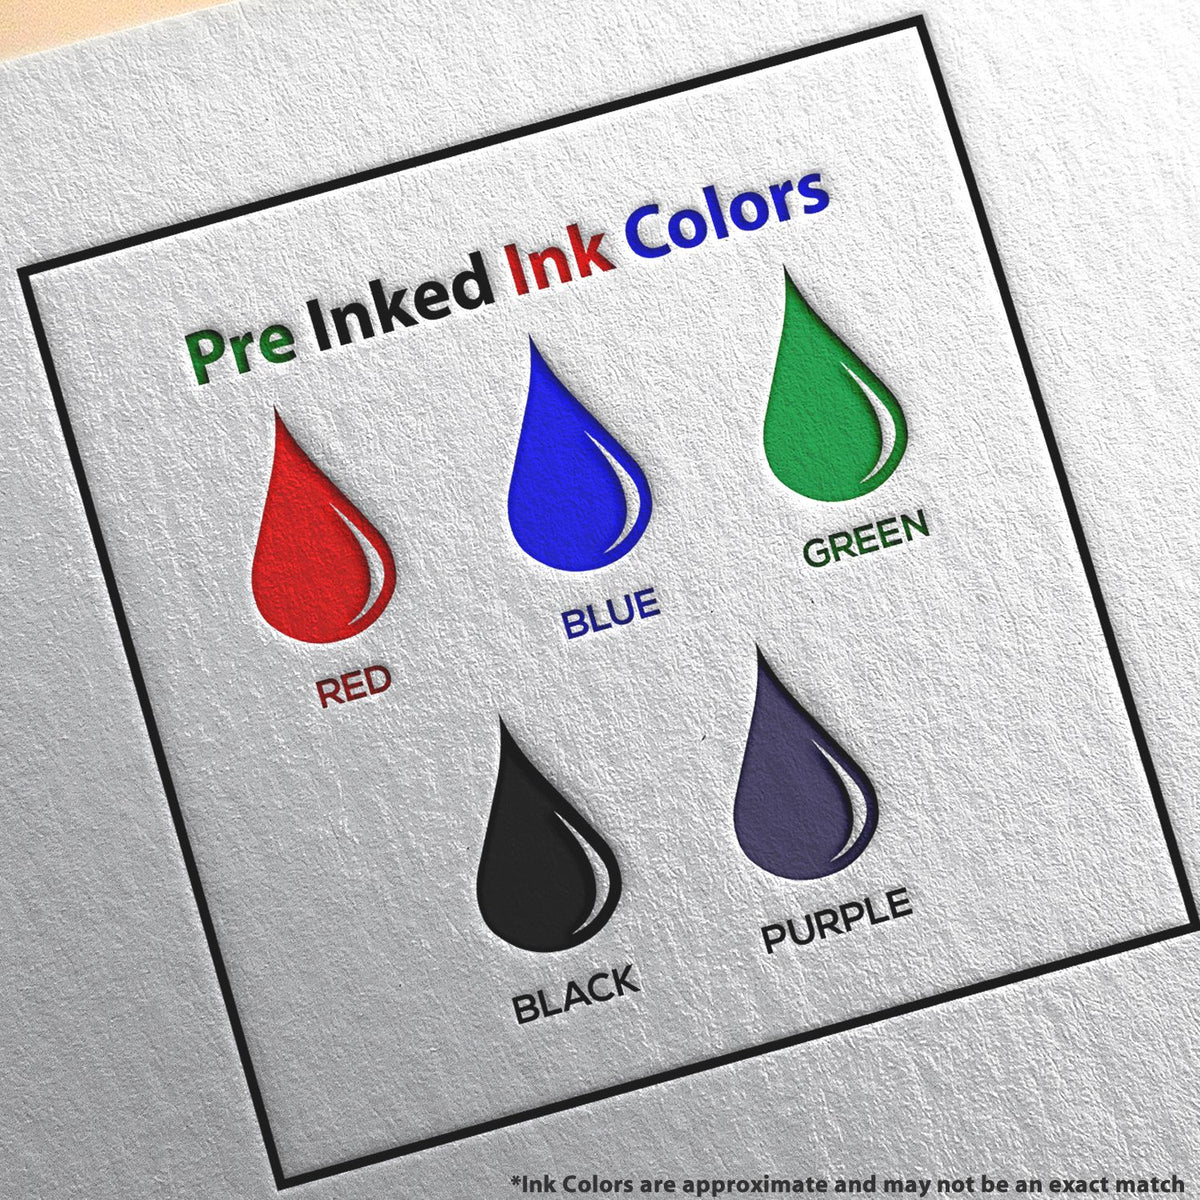 A picture showing the different ink colors or hues available for the Slim Pre-Inked Rectangular Notary Stamp for Maryland product.